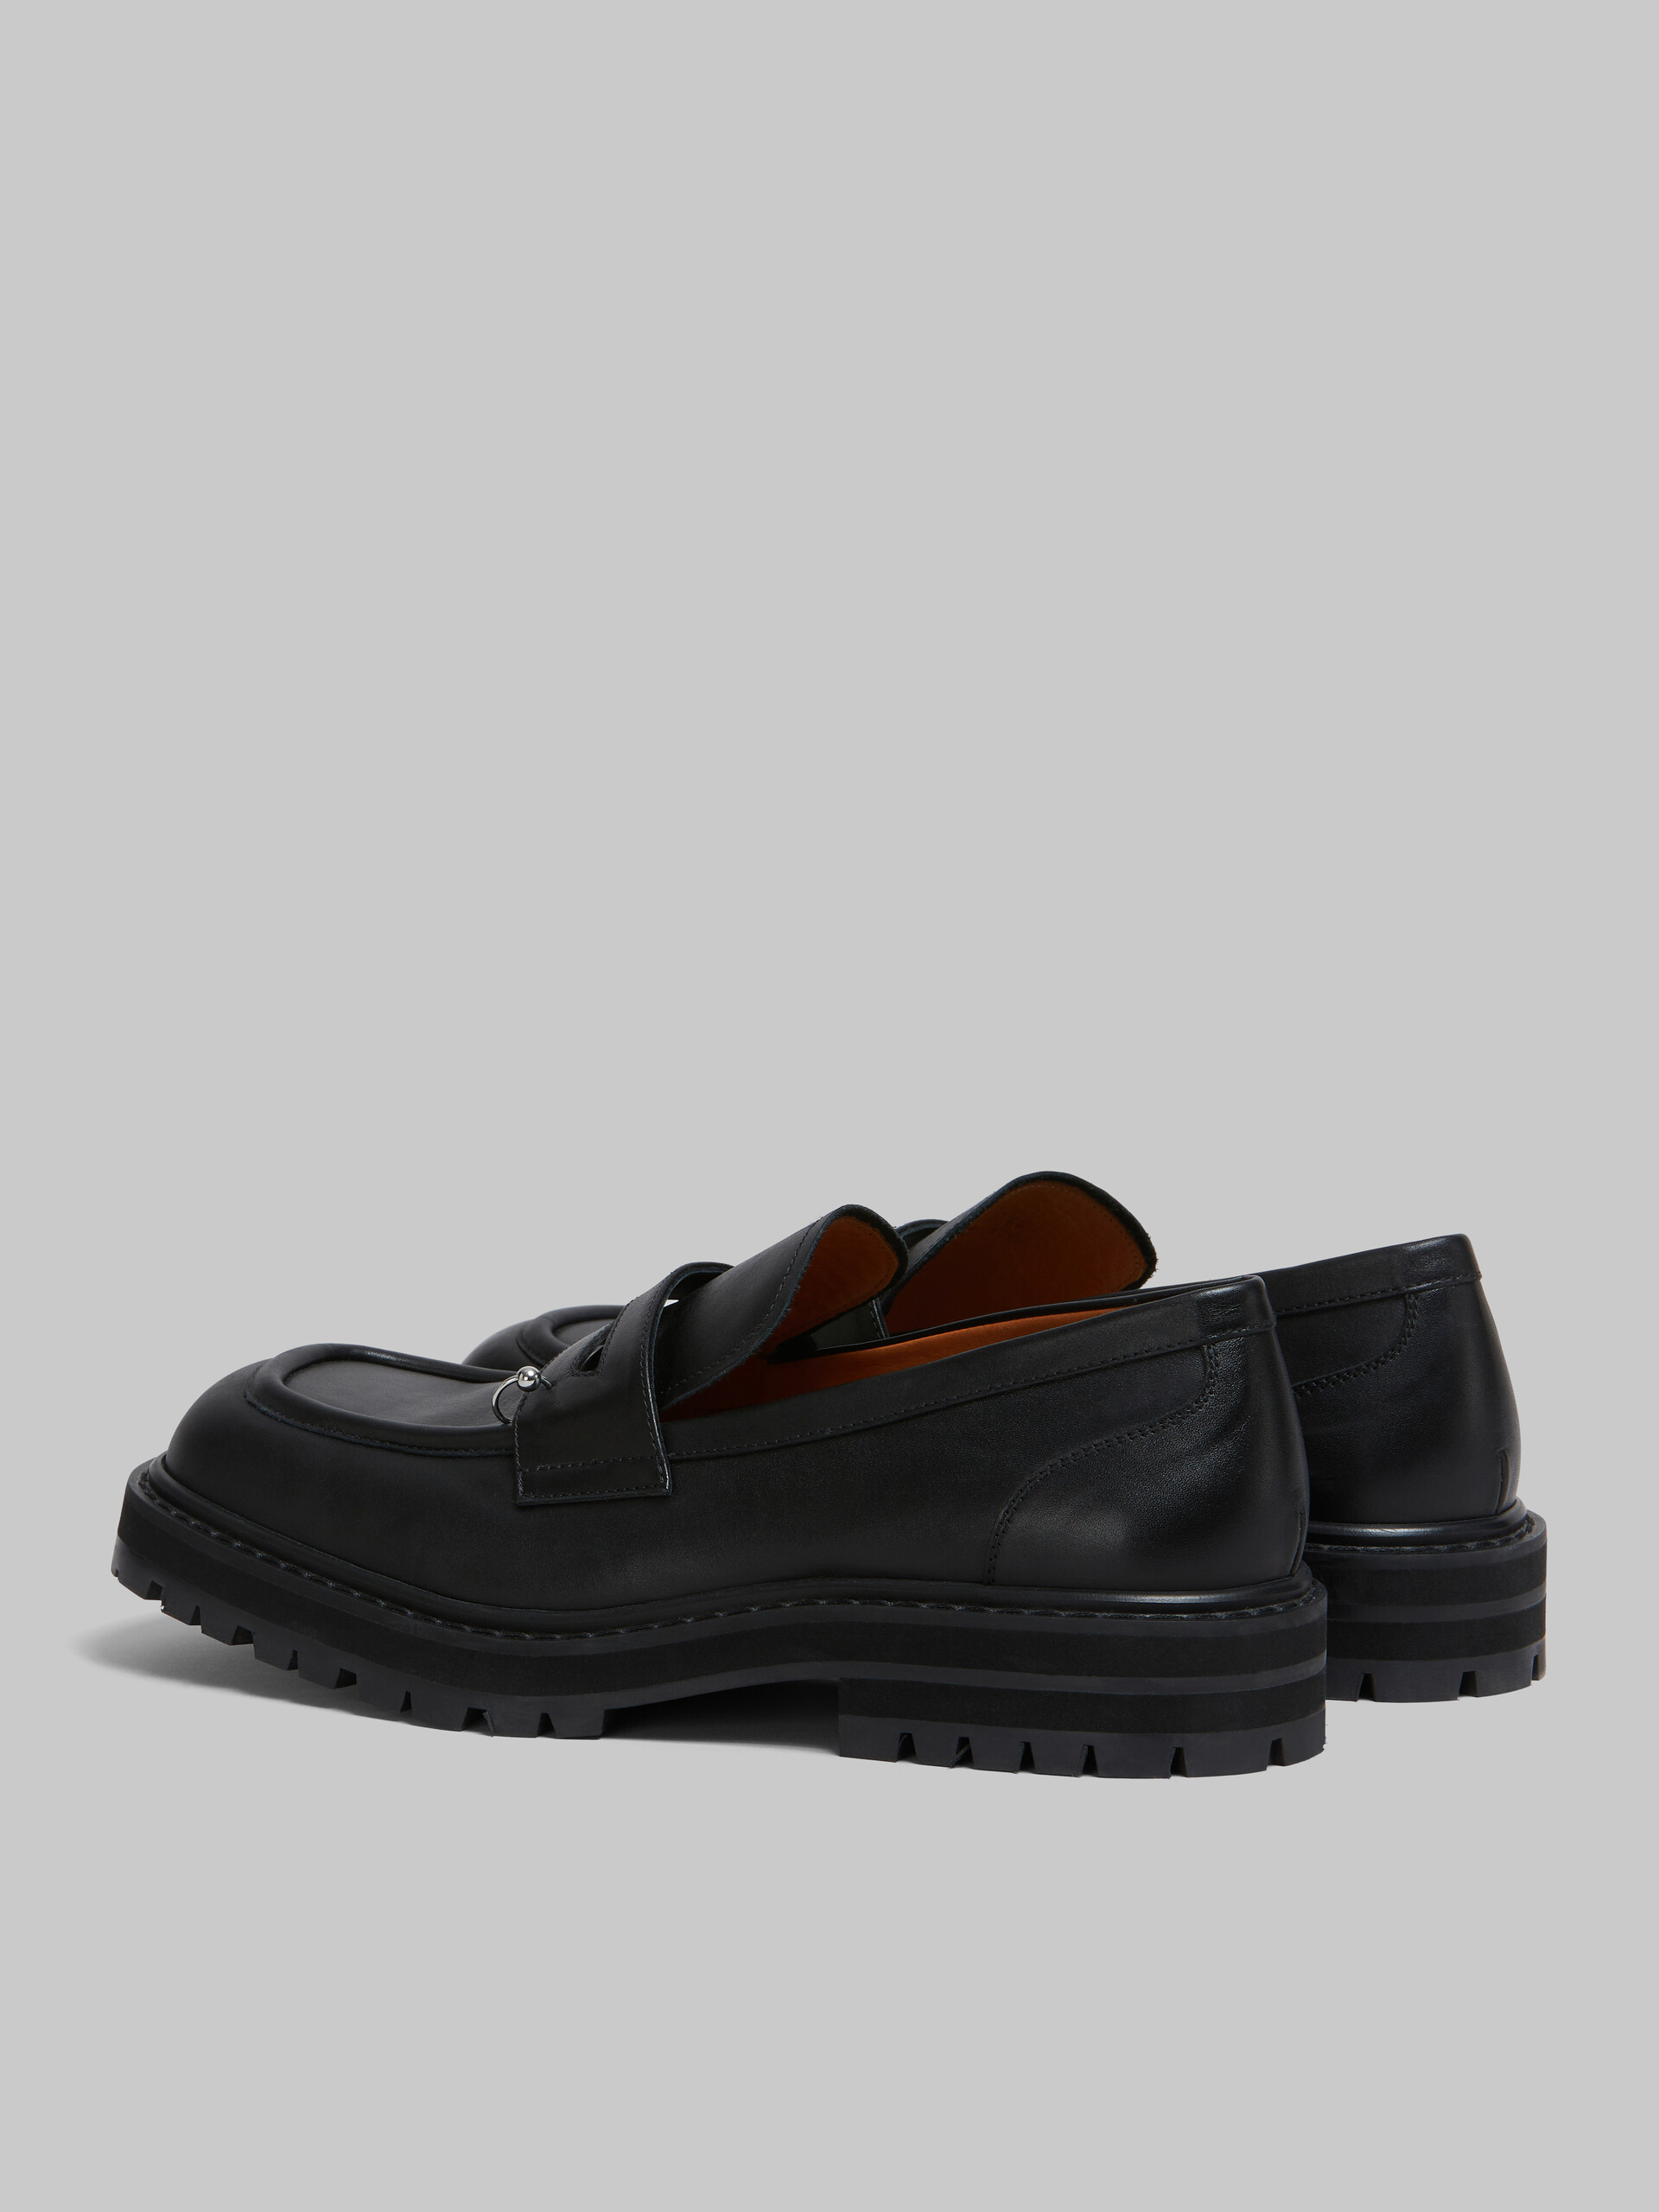 Black leather Piercing 2.0 chunky loafer - Lace-ups - Image 3